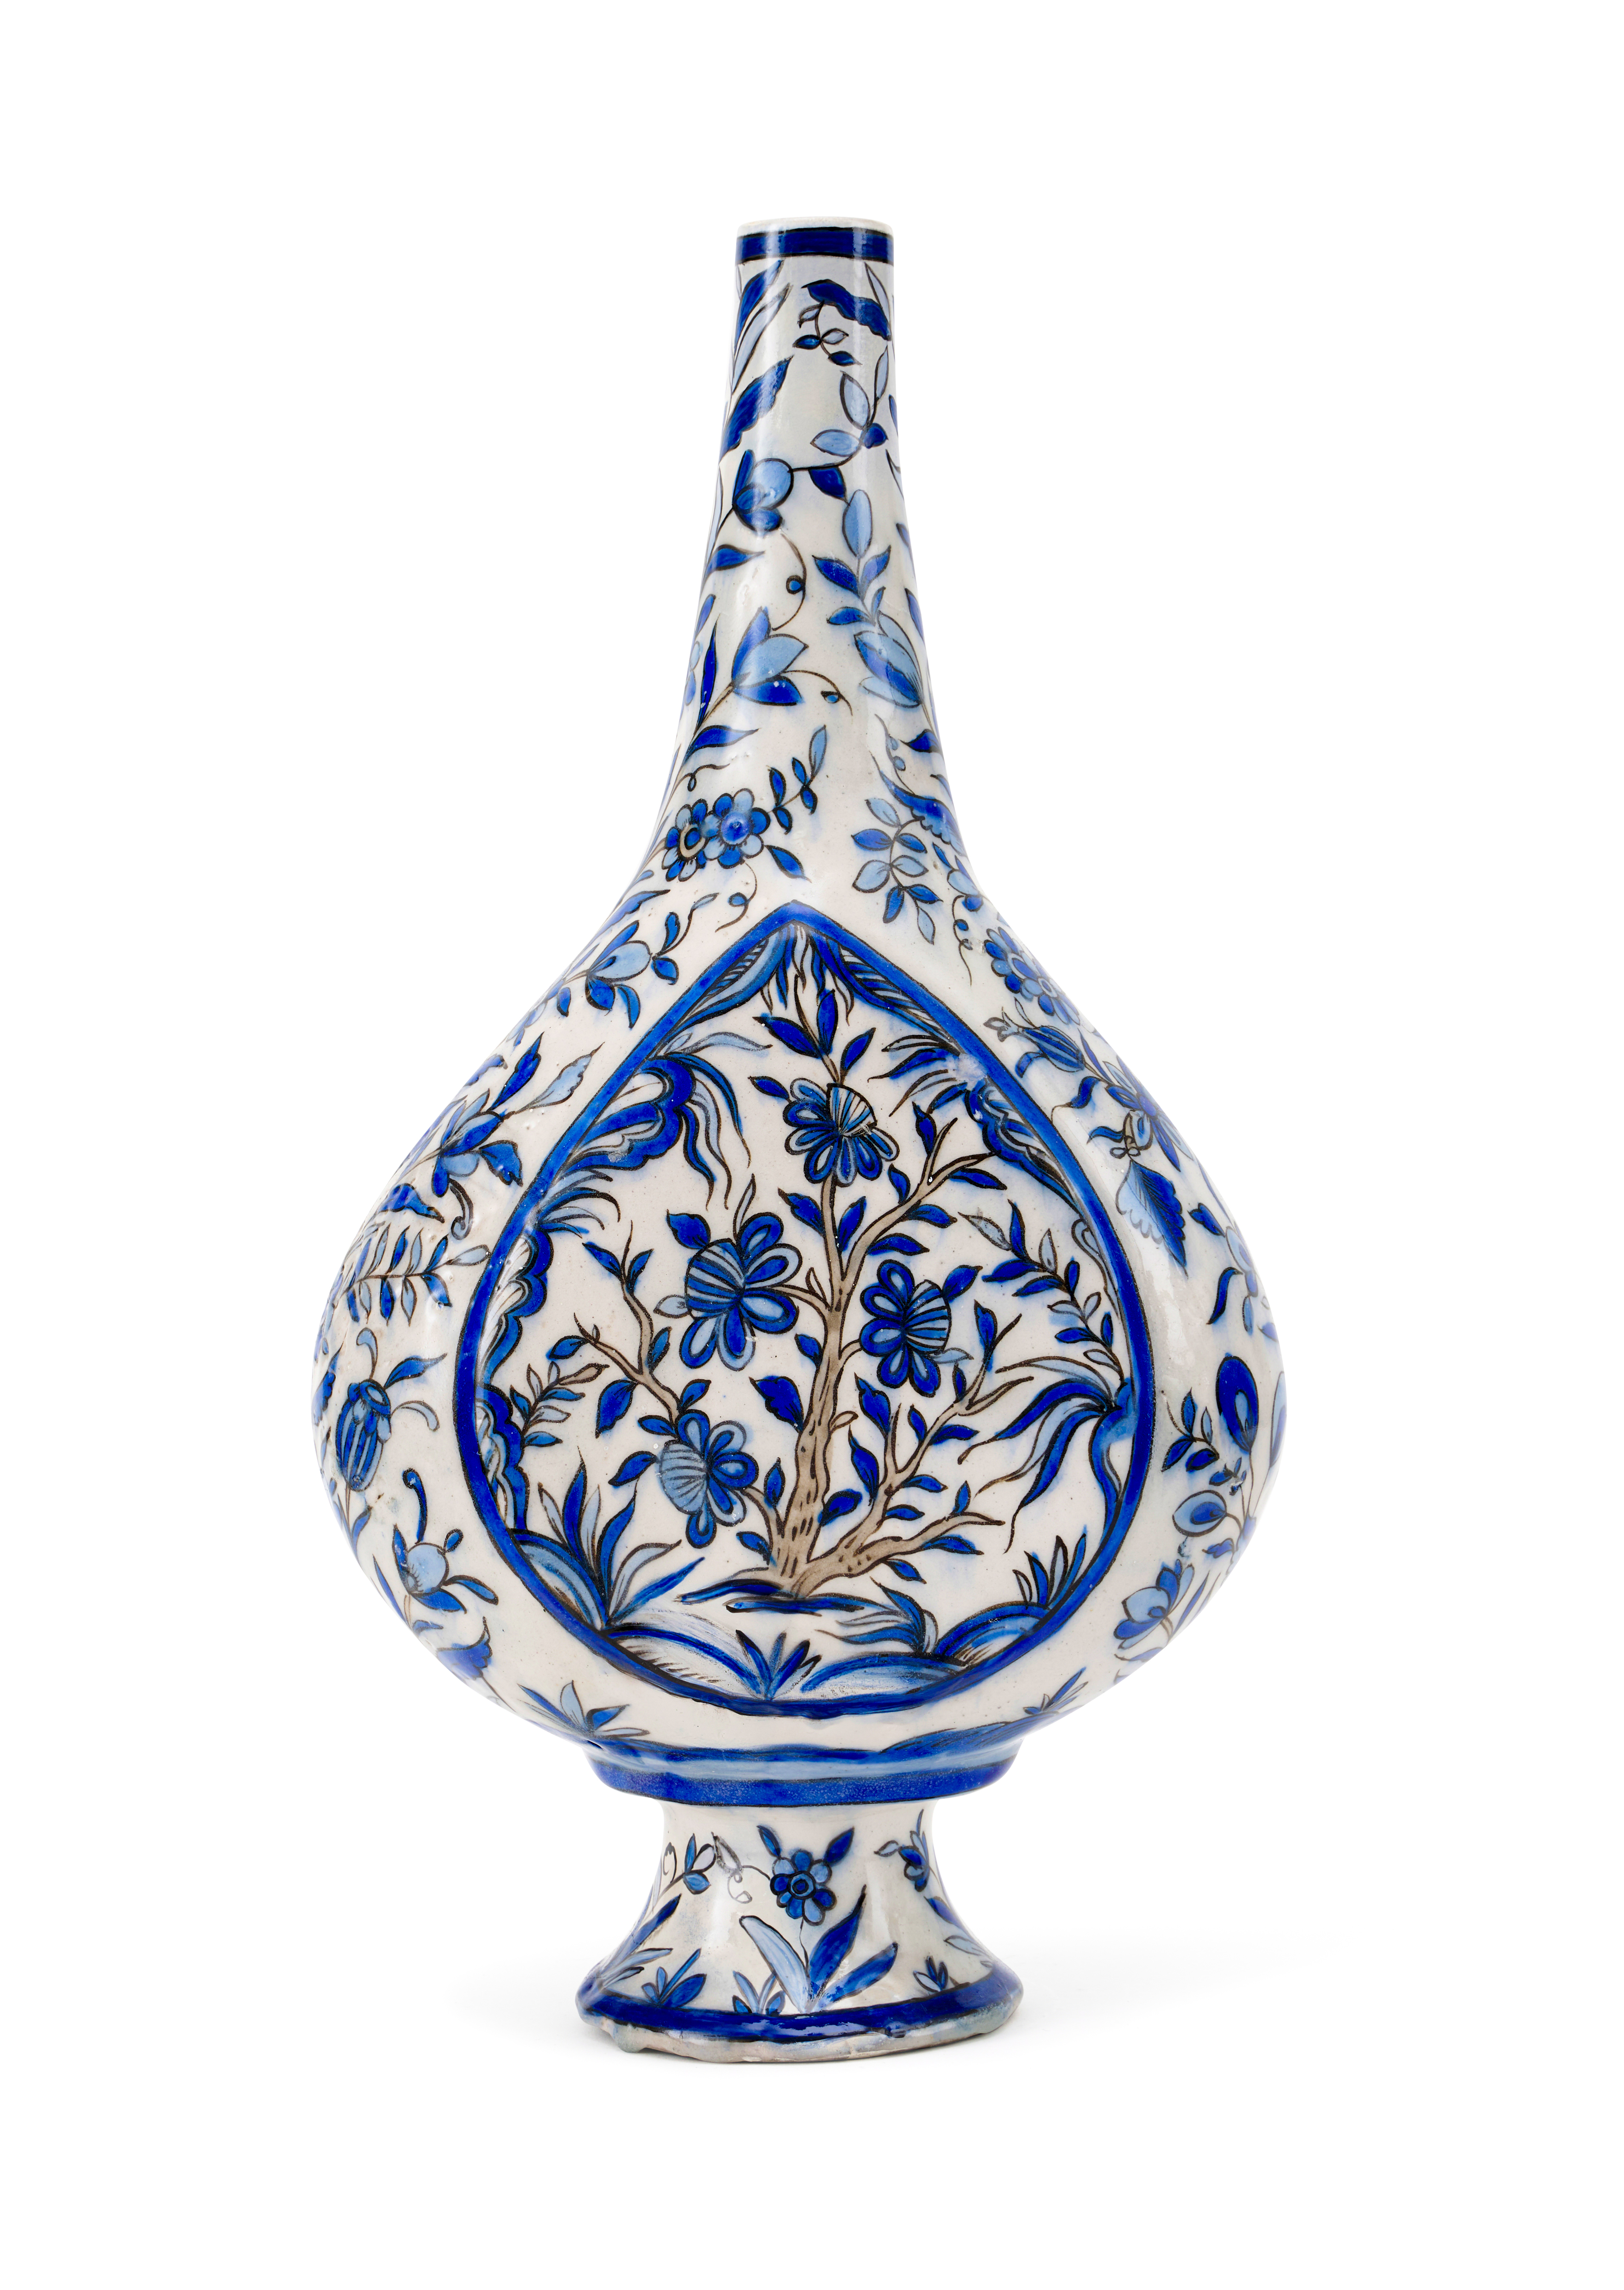 A LARGE QAJAR POLYCHROME ROSEWATER SPRINKLER, 19TH CENTURY, PERSIA - Image 4 of 5